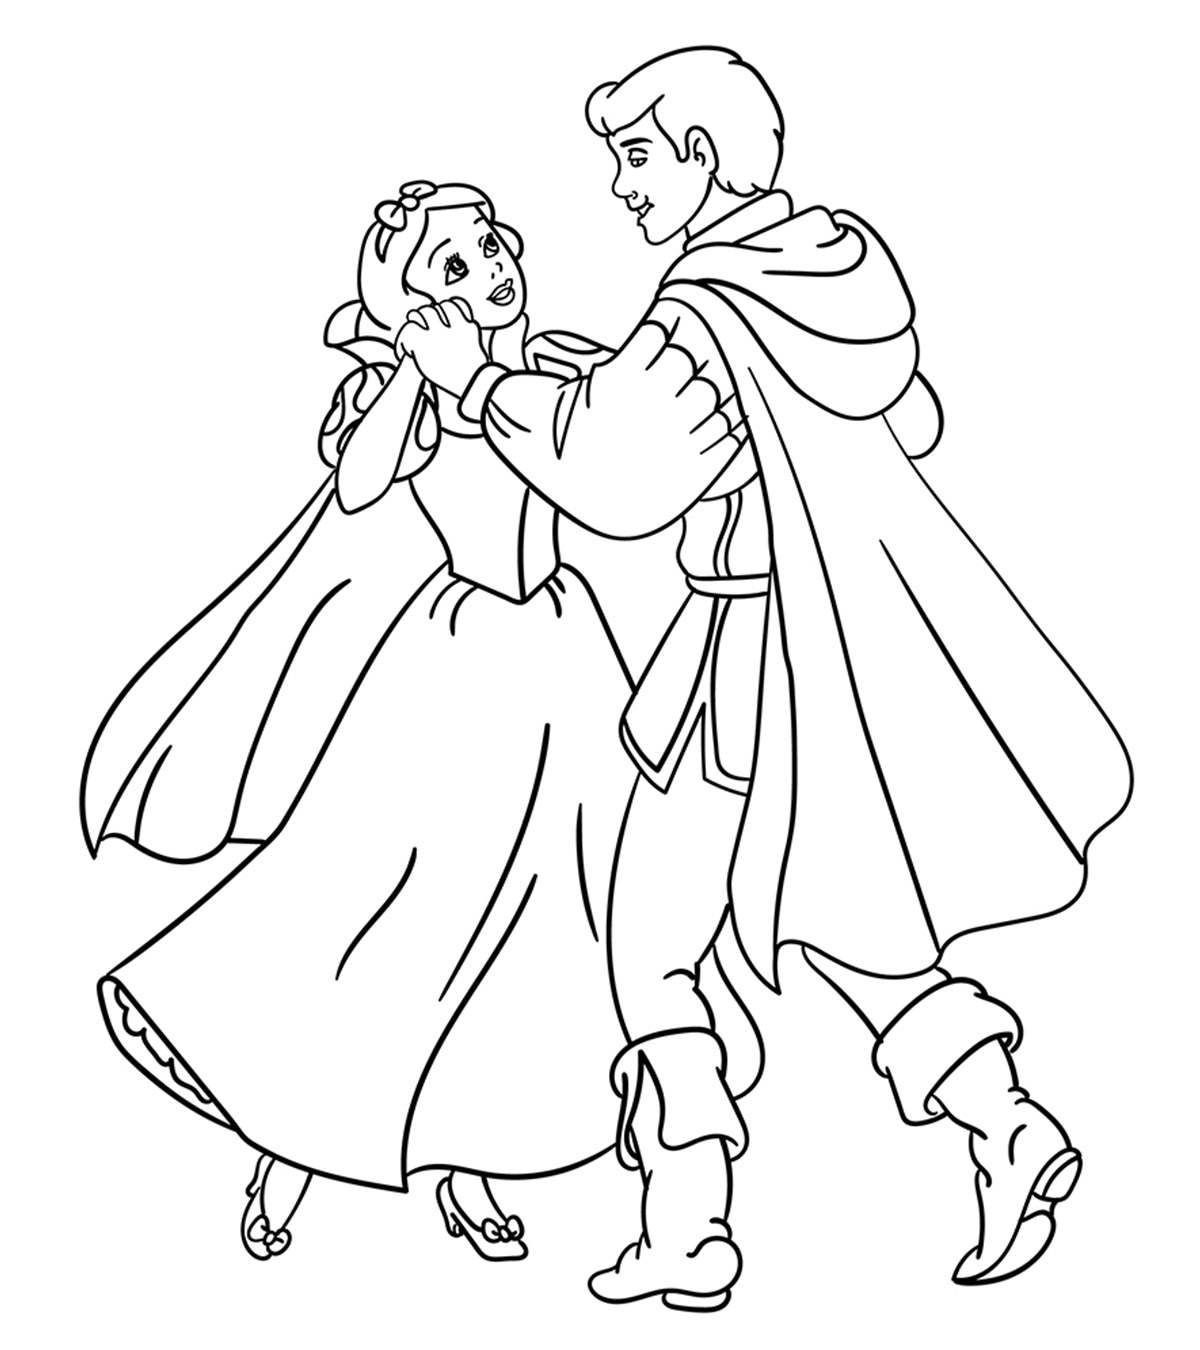 20 Beautiful Snow White Coloring Pages For Your Little Ones_image